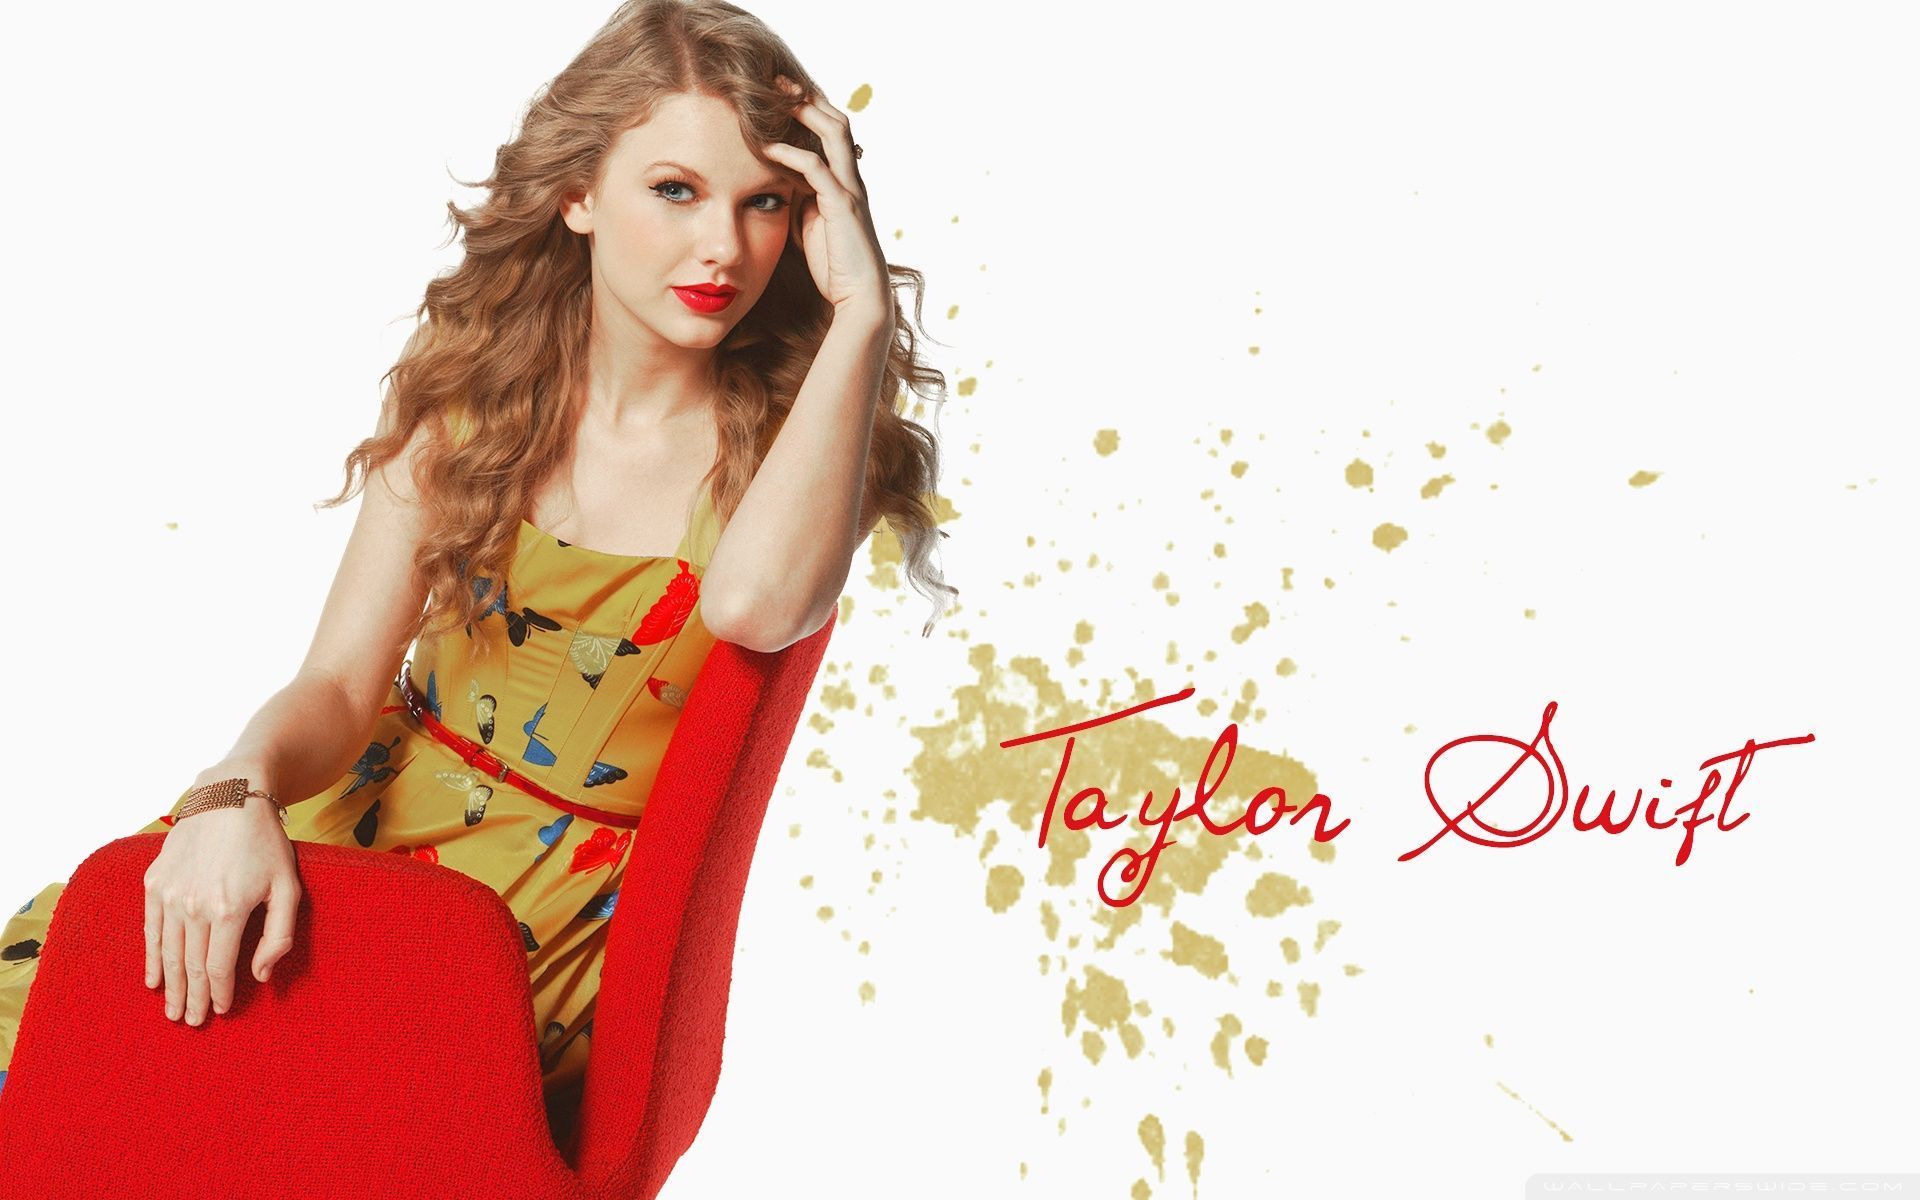 Hot Singer Taylor Swift Wallpapers